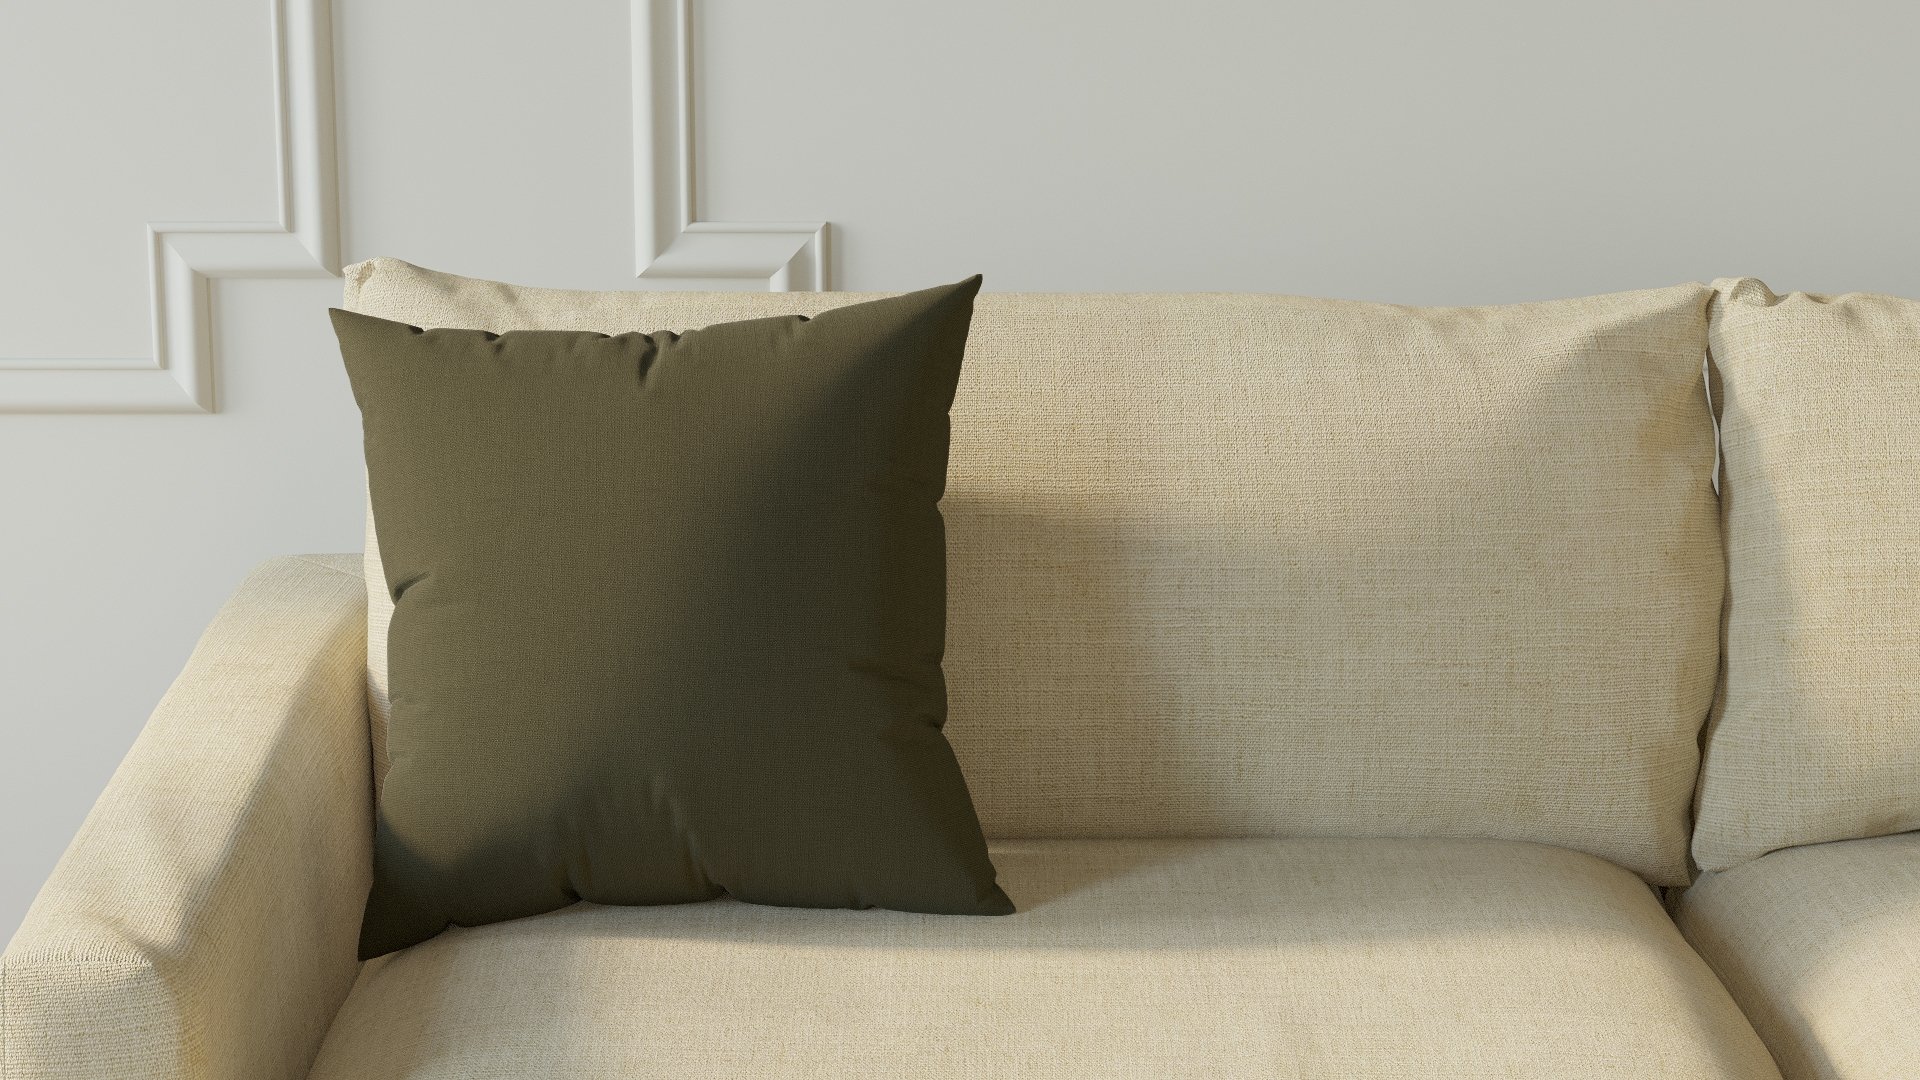 Throw Pillow, Olive Linen, 18" x 18" - Image 2